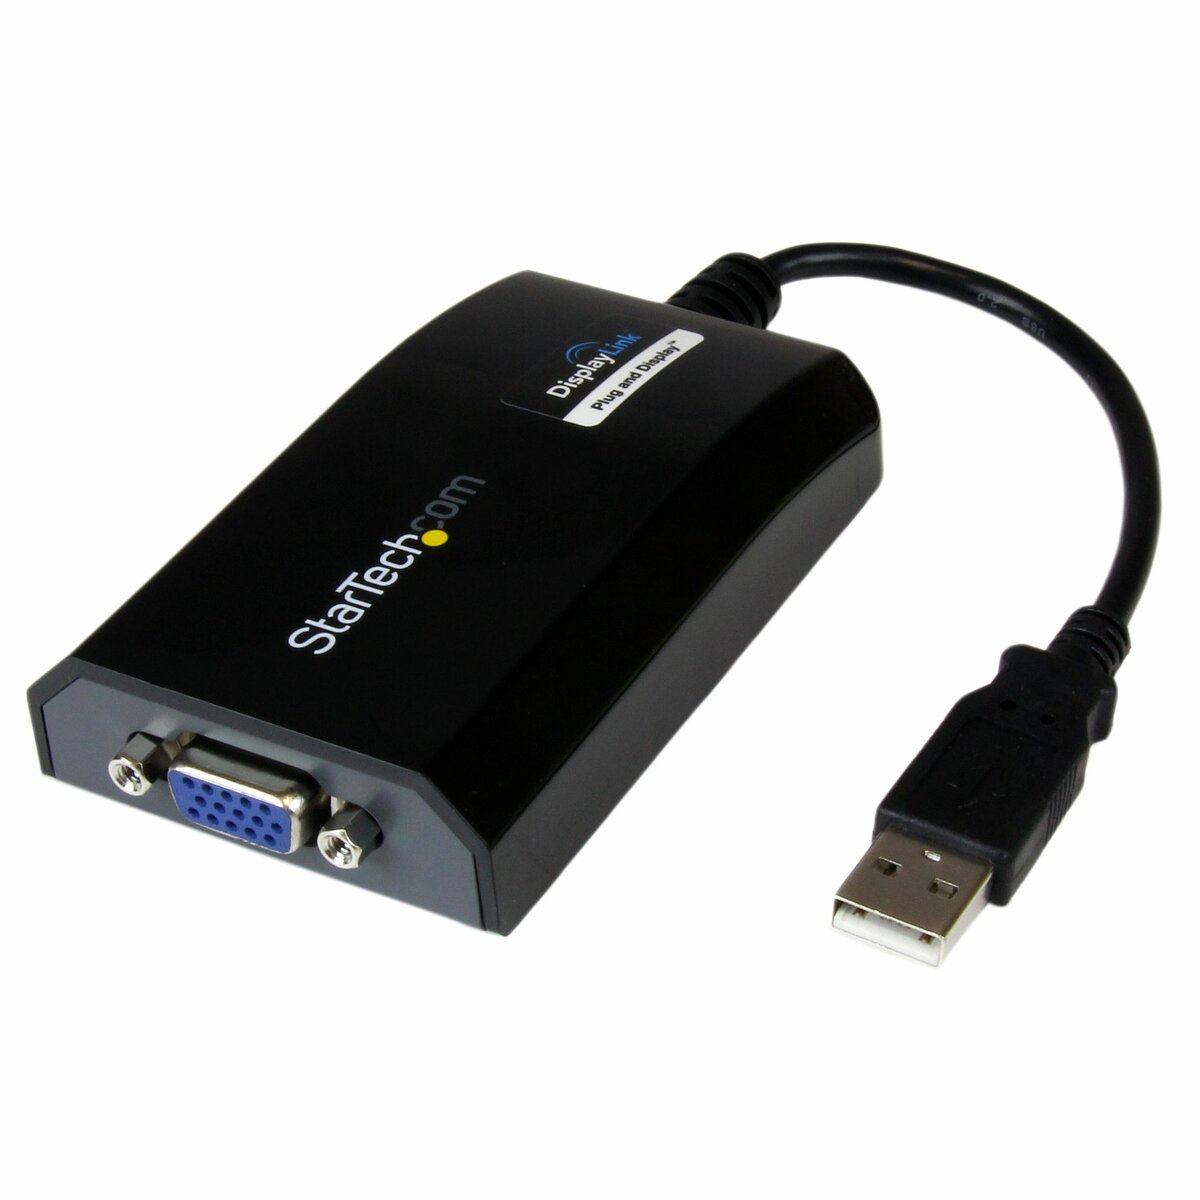 StarTech.com USB to - 1920x1200 - External Video & Graphics Card - Dual Monitor - Supports Mac & Windows and Mirror & Extend Mode (USB2VGAPRO2) - external video adapter - DL-195 - 16 MB - black